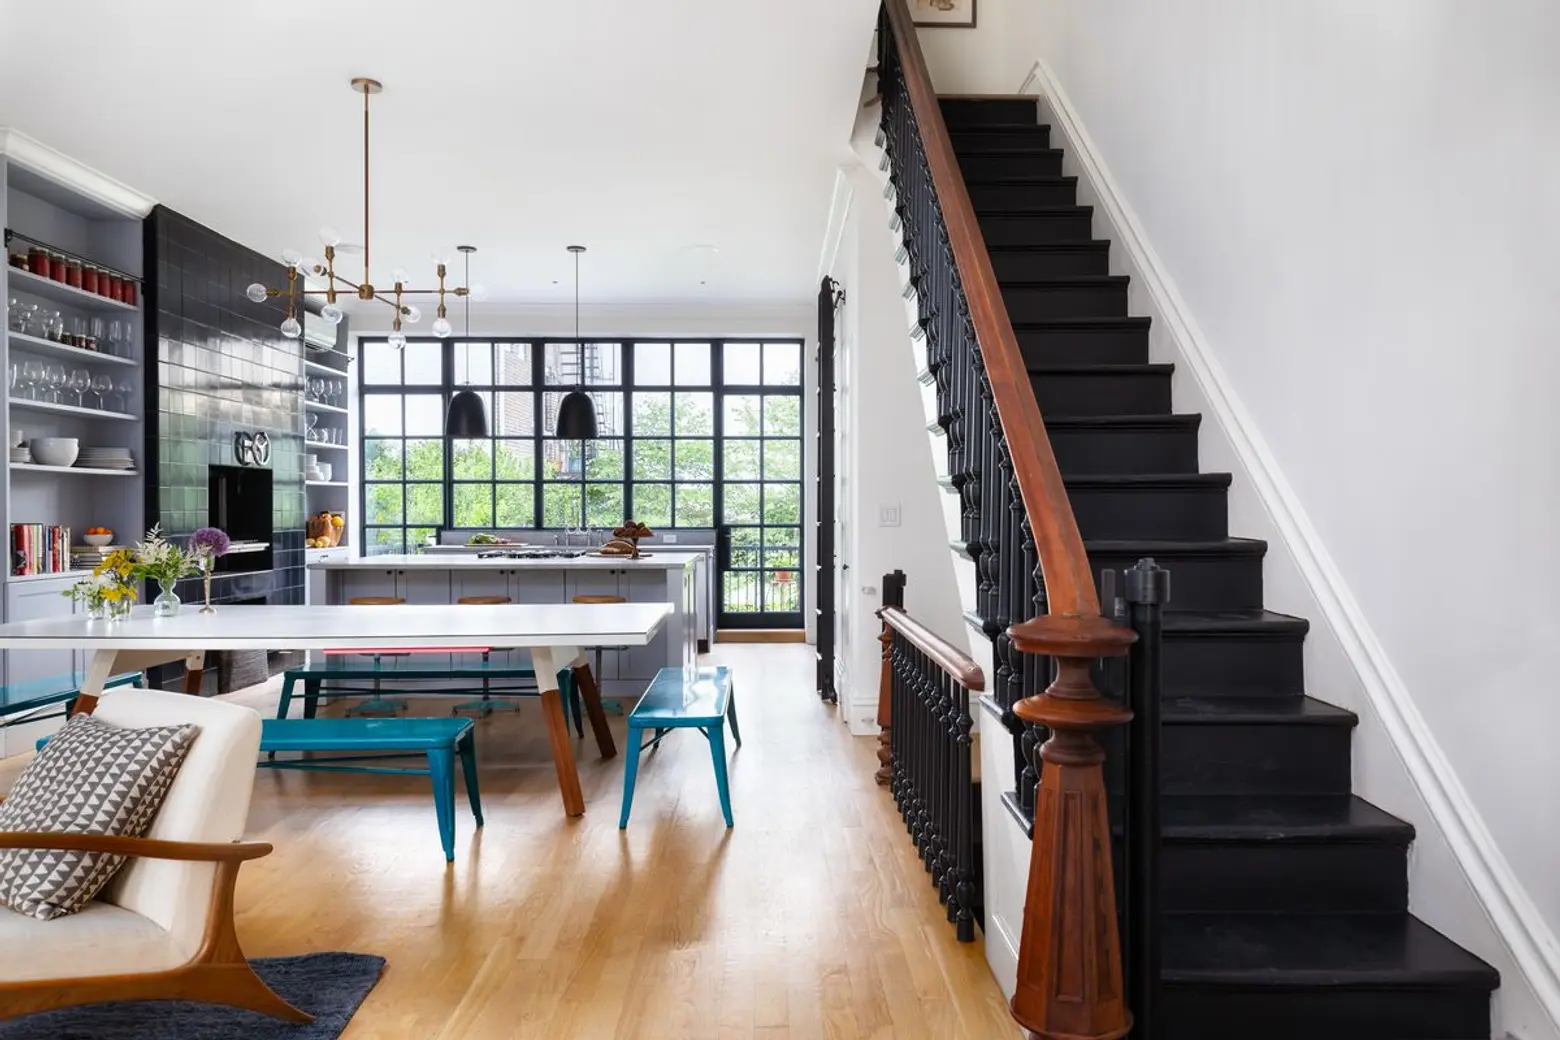 $4M Park Slope brownstone with interiors by Elizabeth Roberts embodies considered design